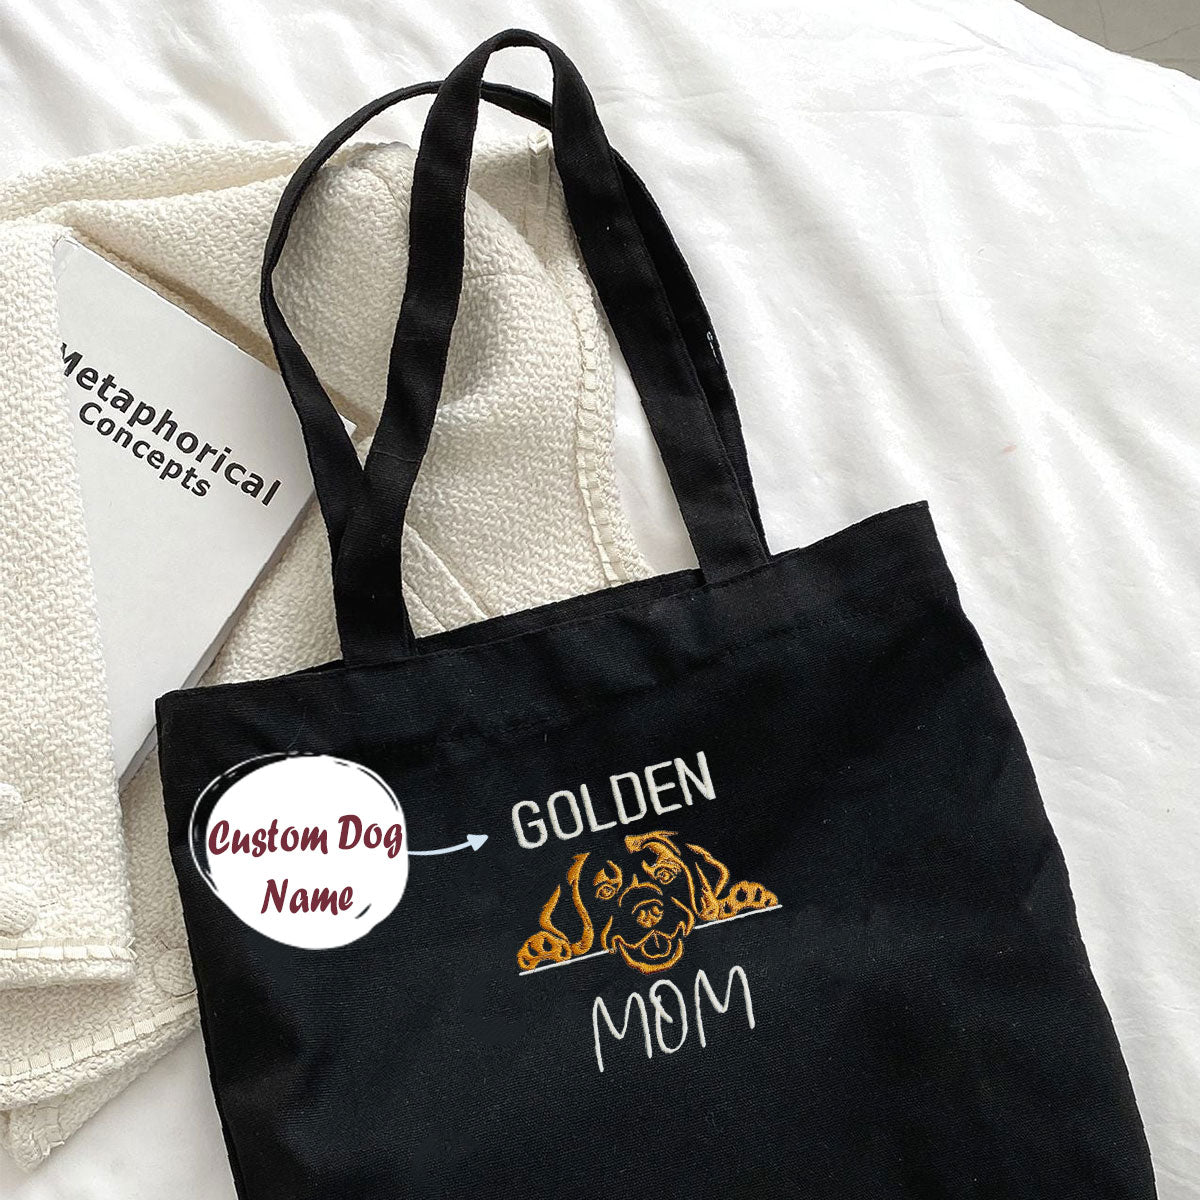 Personalized Golden Retriever Dog Mom Embroidered Tote Bag, Custom Tote Bag with Dog Name, Gifts for Golden Retriever Lovers